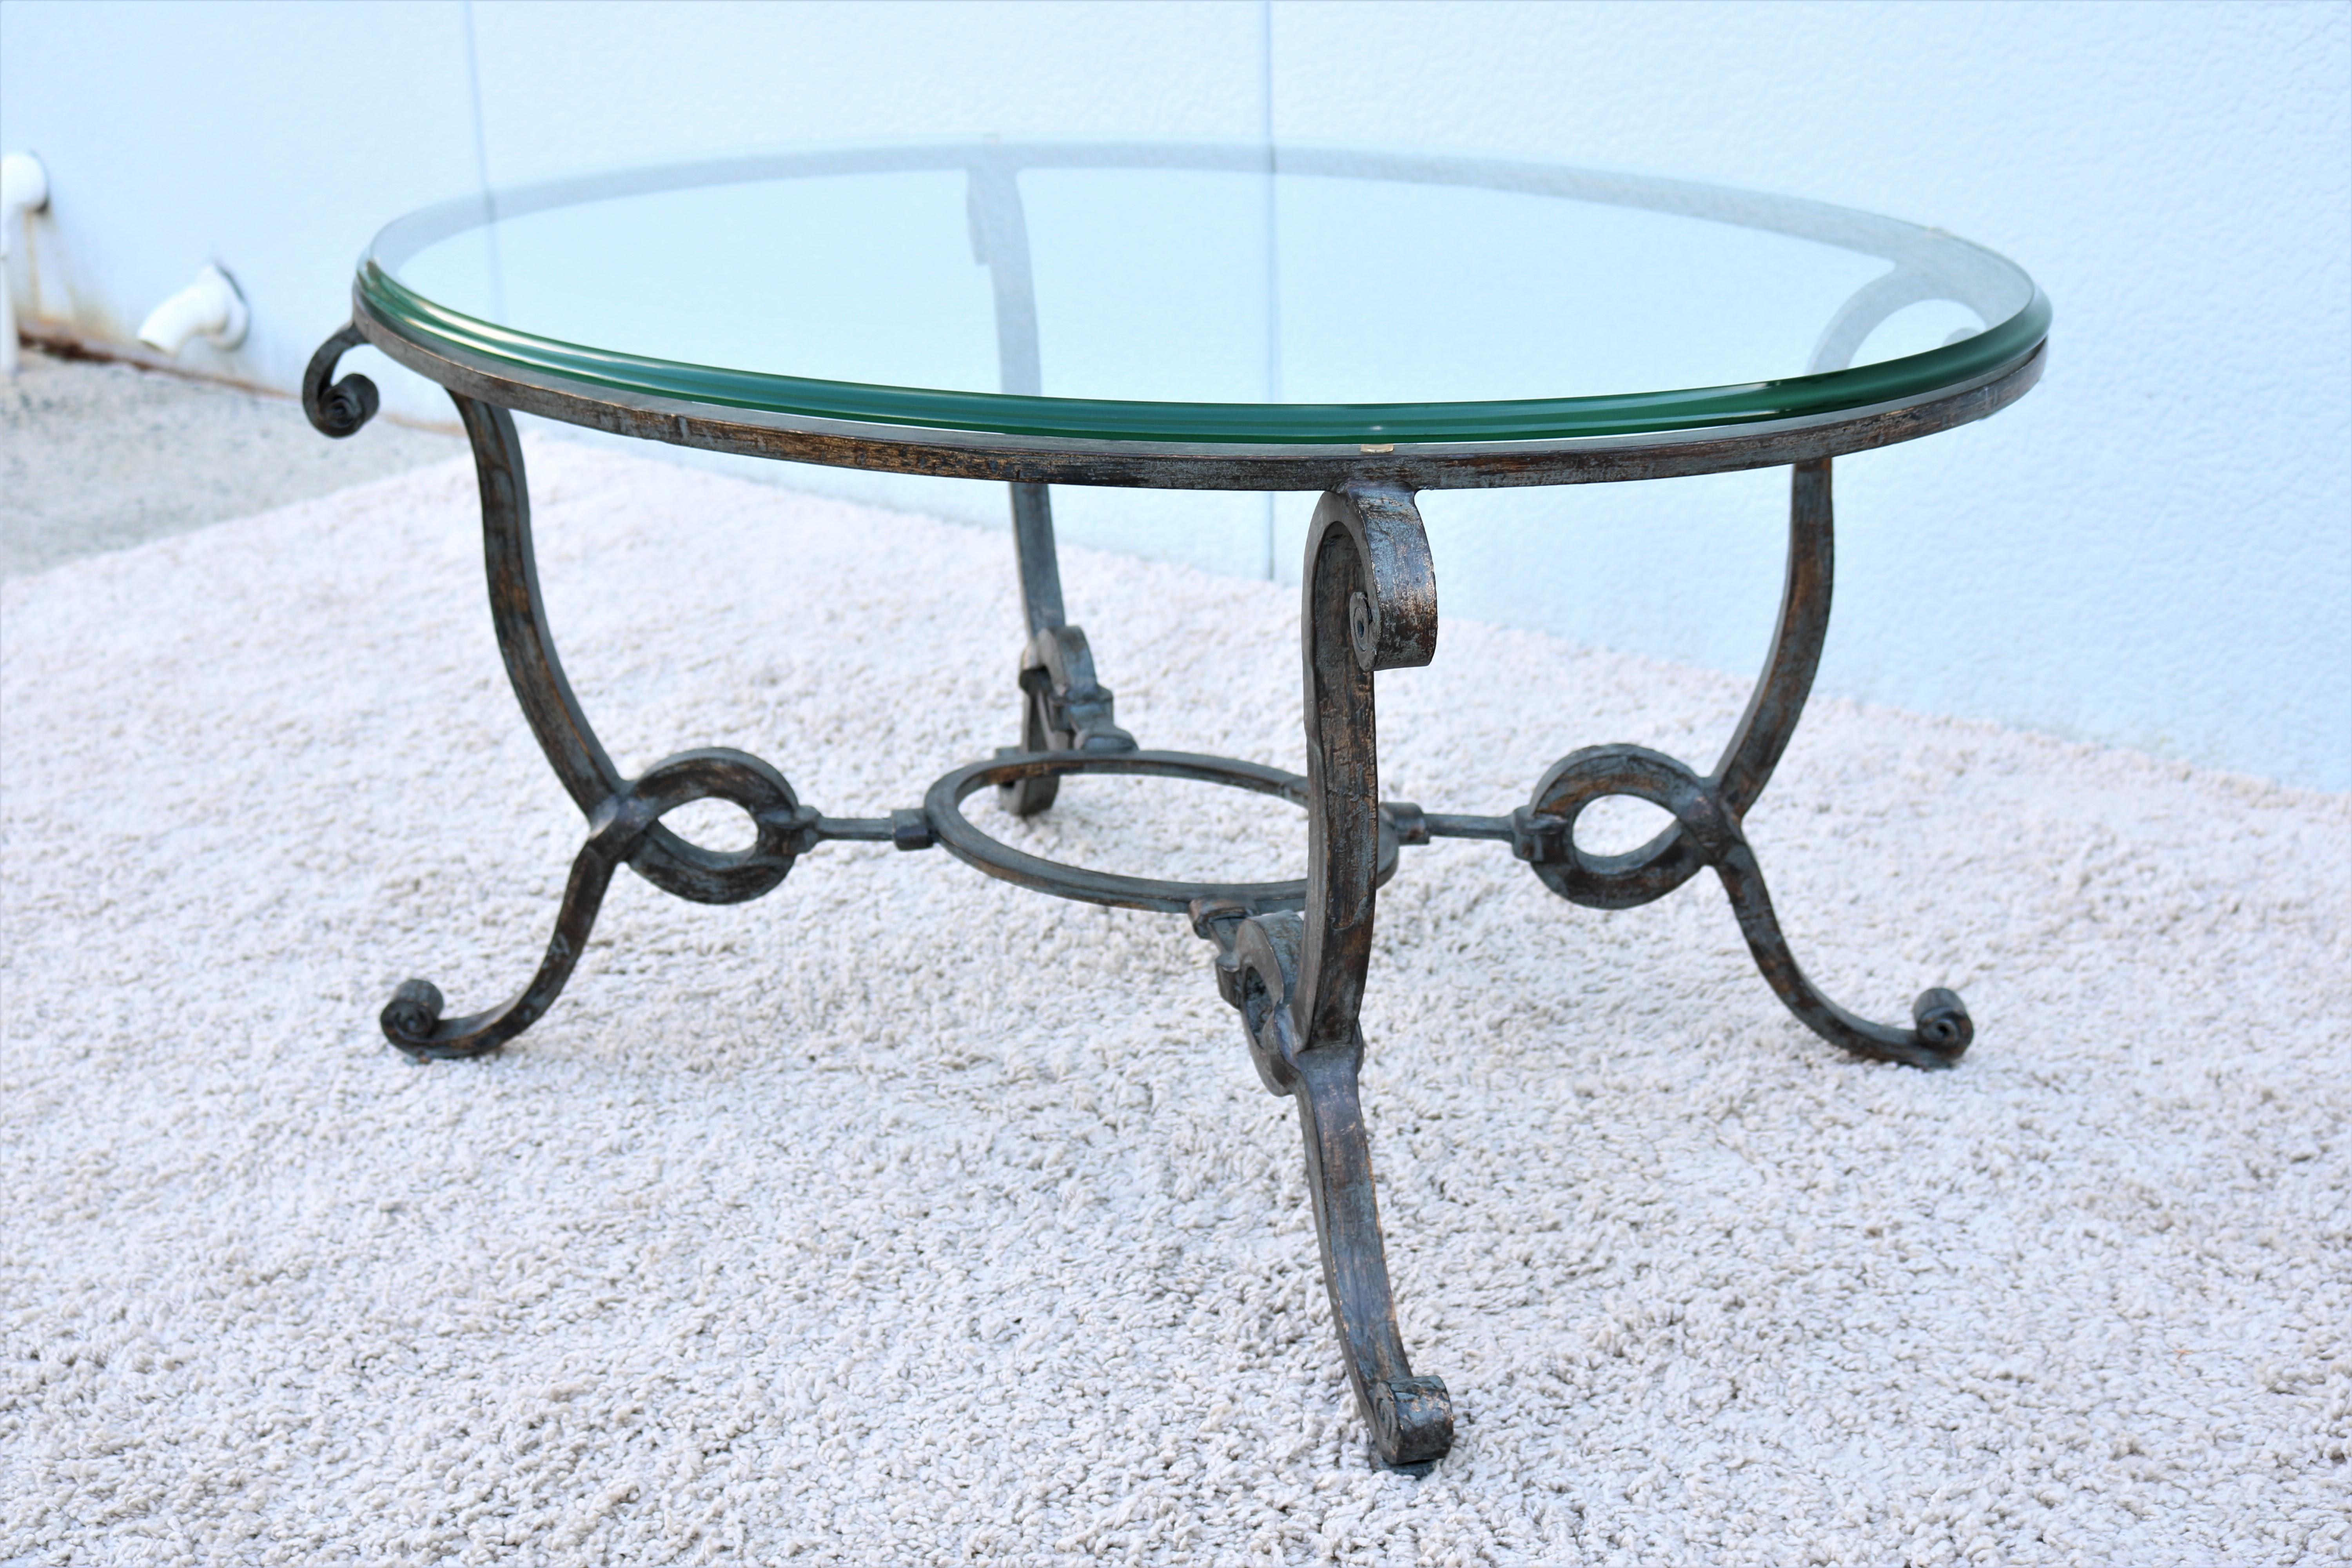 Vintage French Style Wrought Iron and Glass Oval Coffee Table In Excellent Condition For Sale In Secaucus, NJ